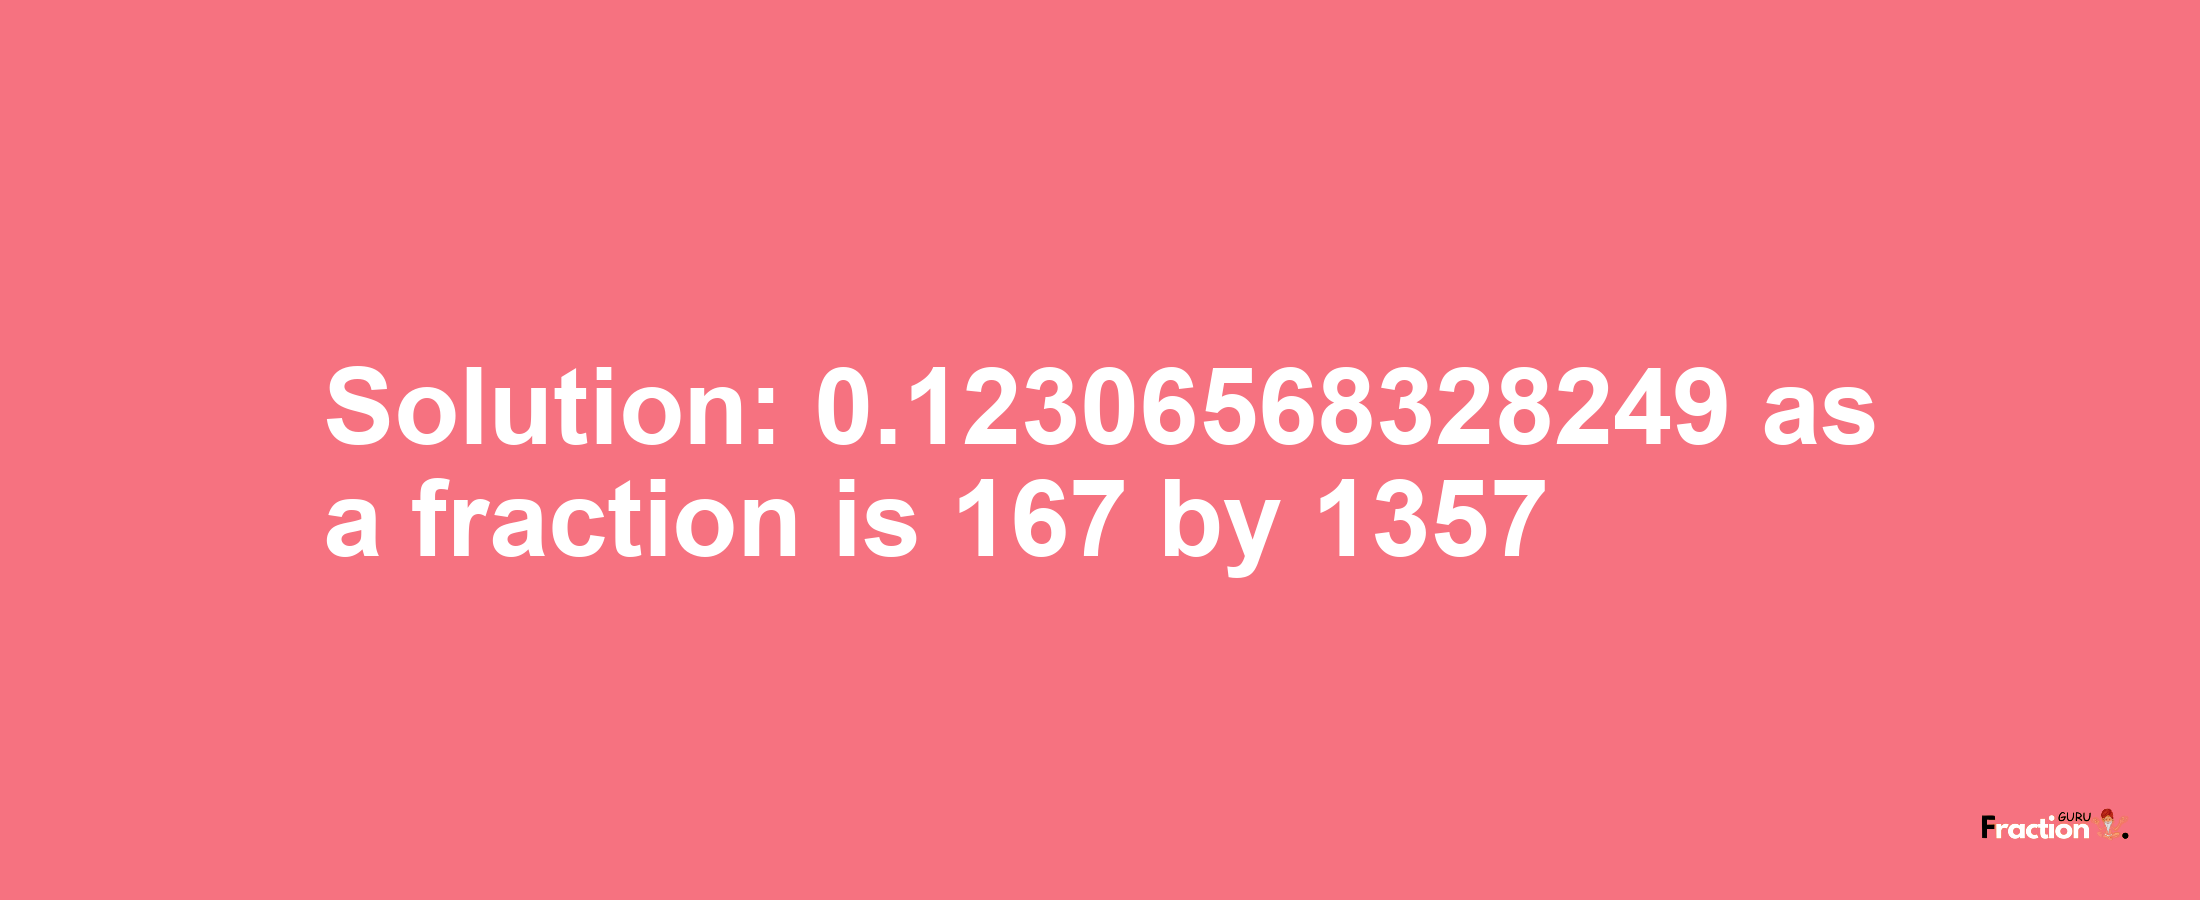 Solution:0.12306568328249 as a fraction is 167/1357